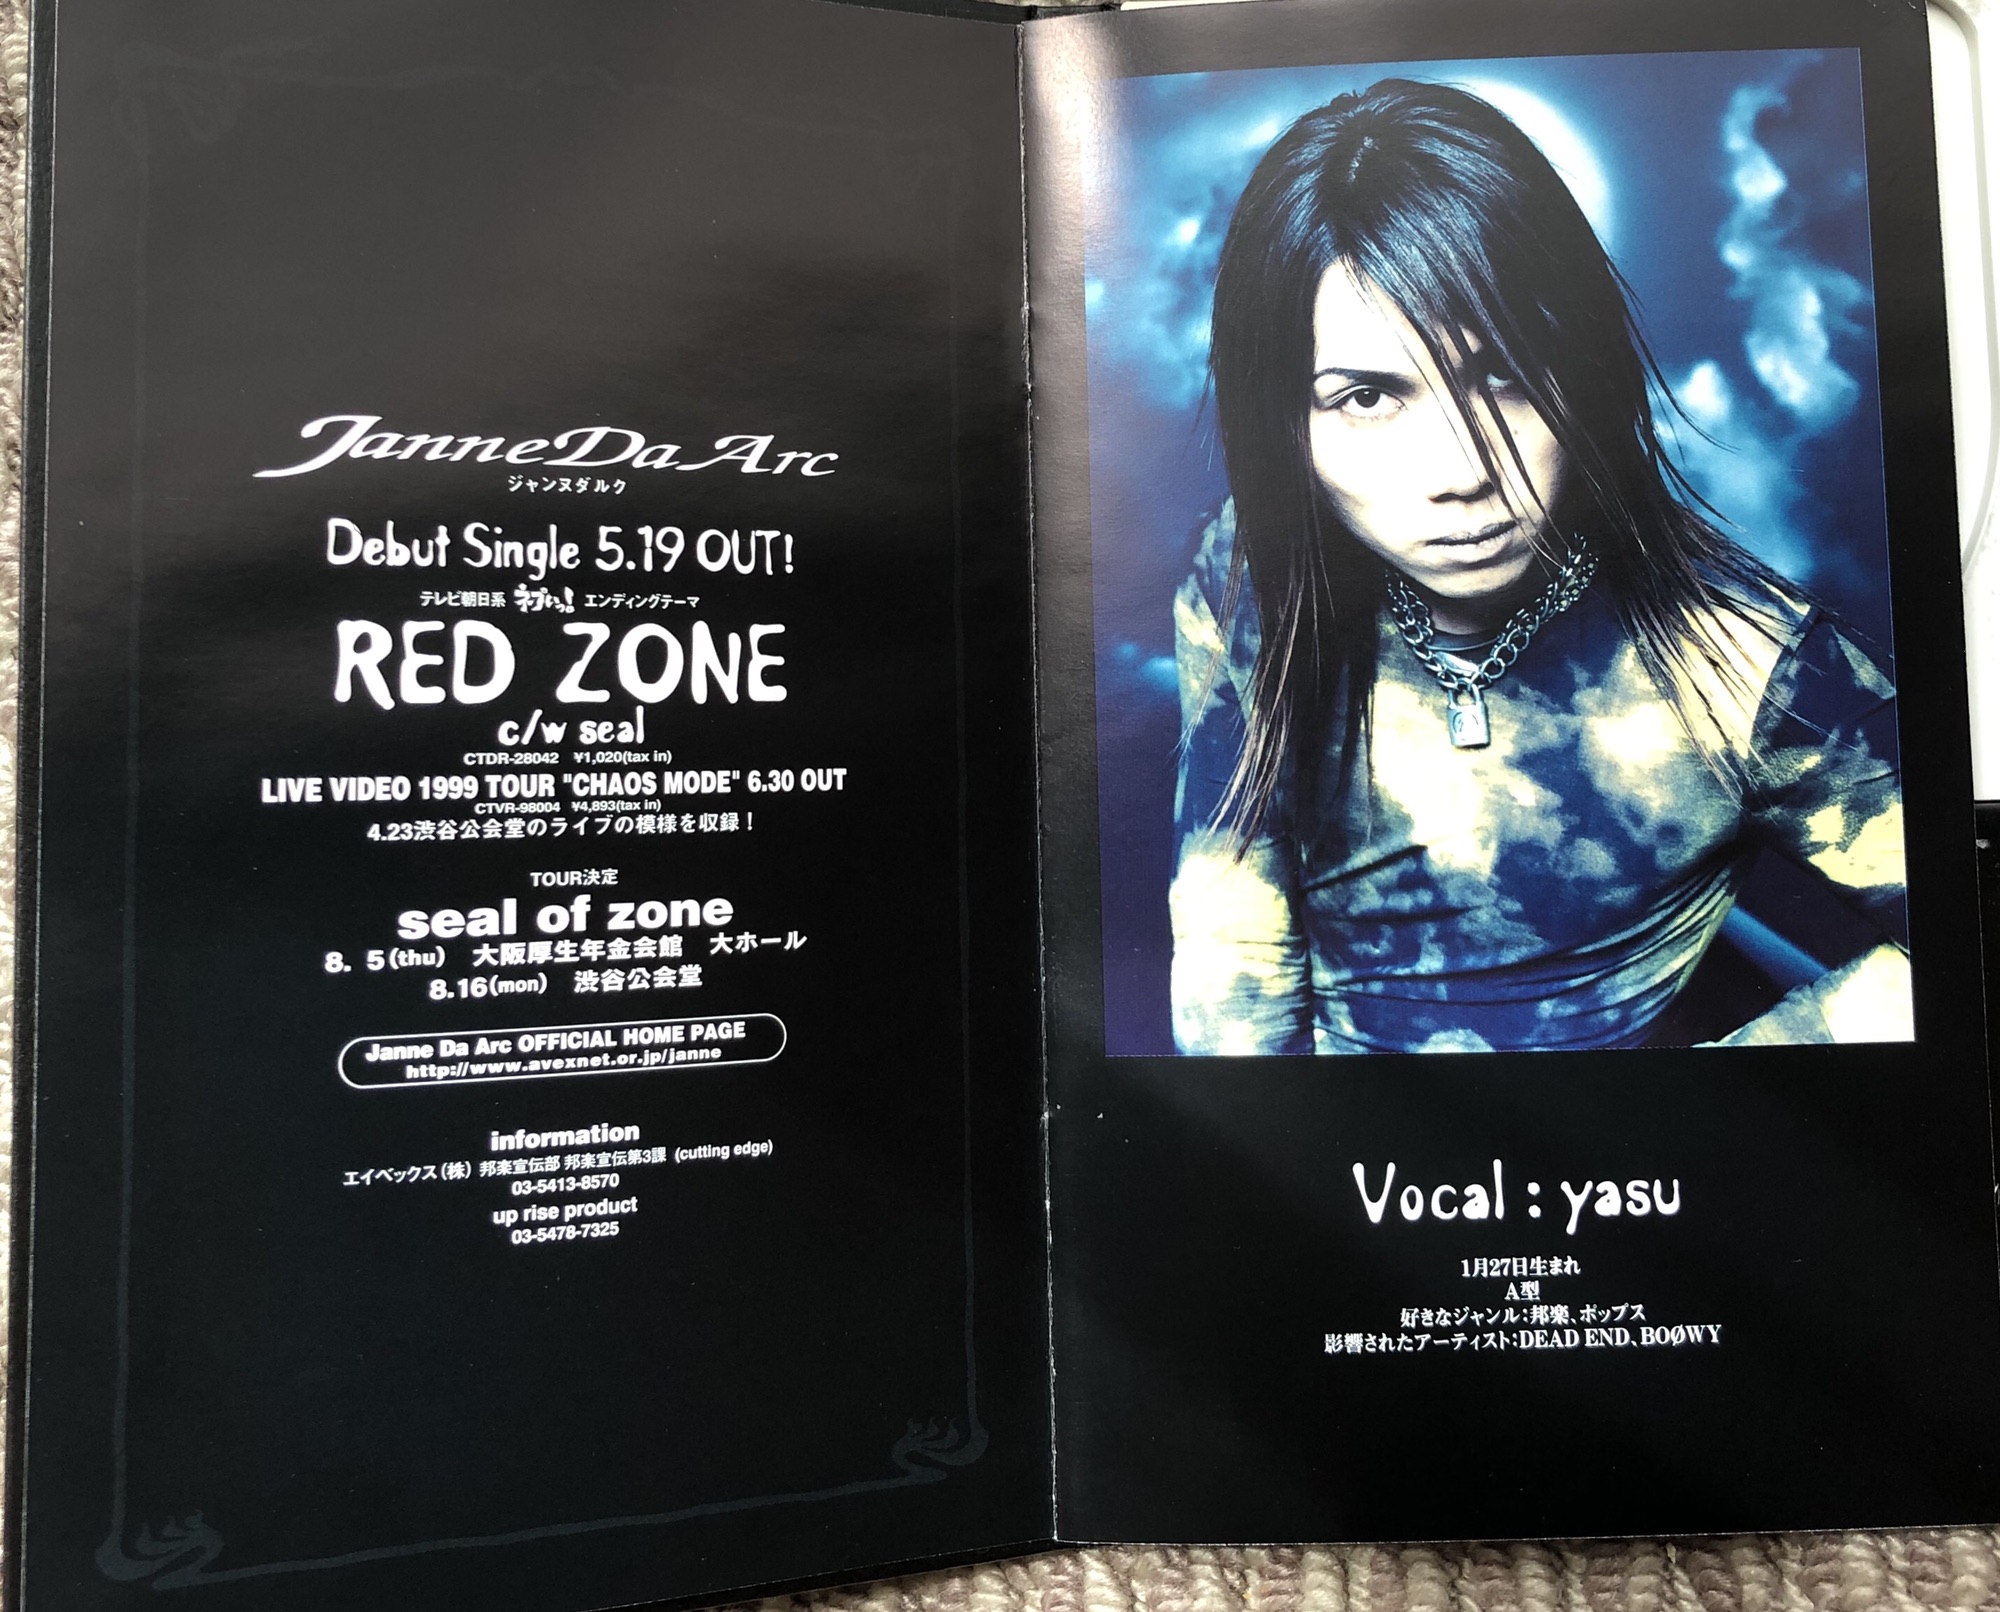 major debut 1st single〝RED ZONE〟 | Janne Da Arc discography ...